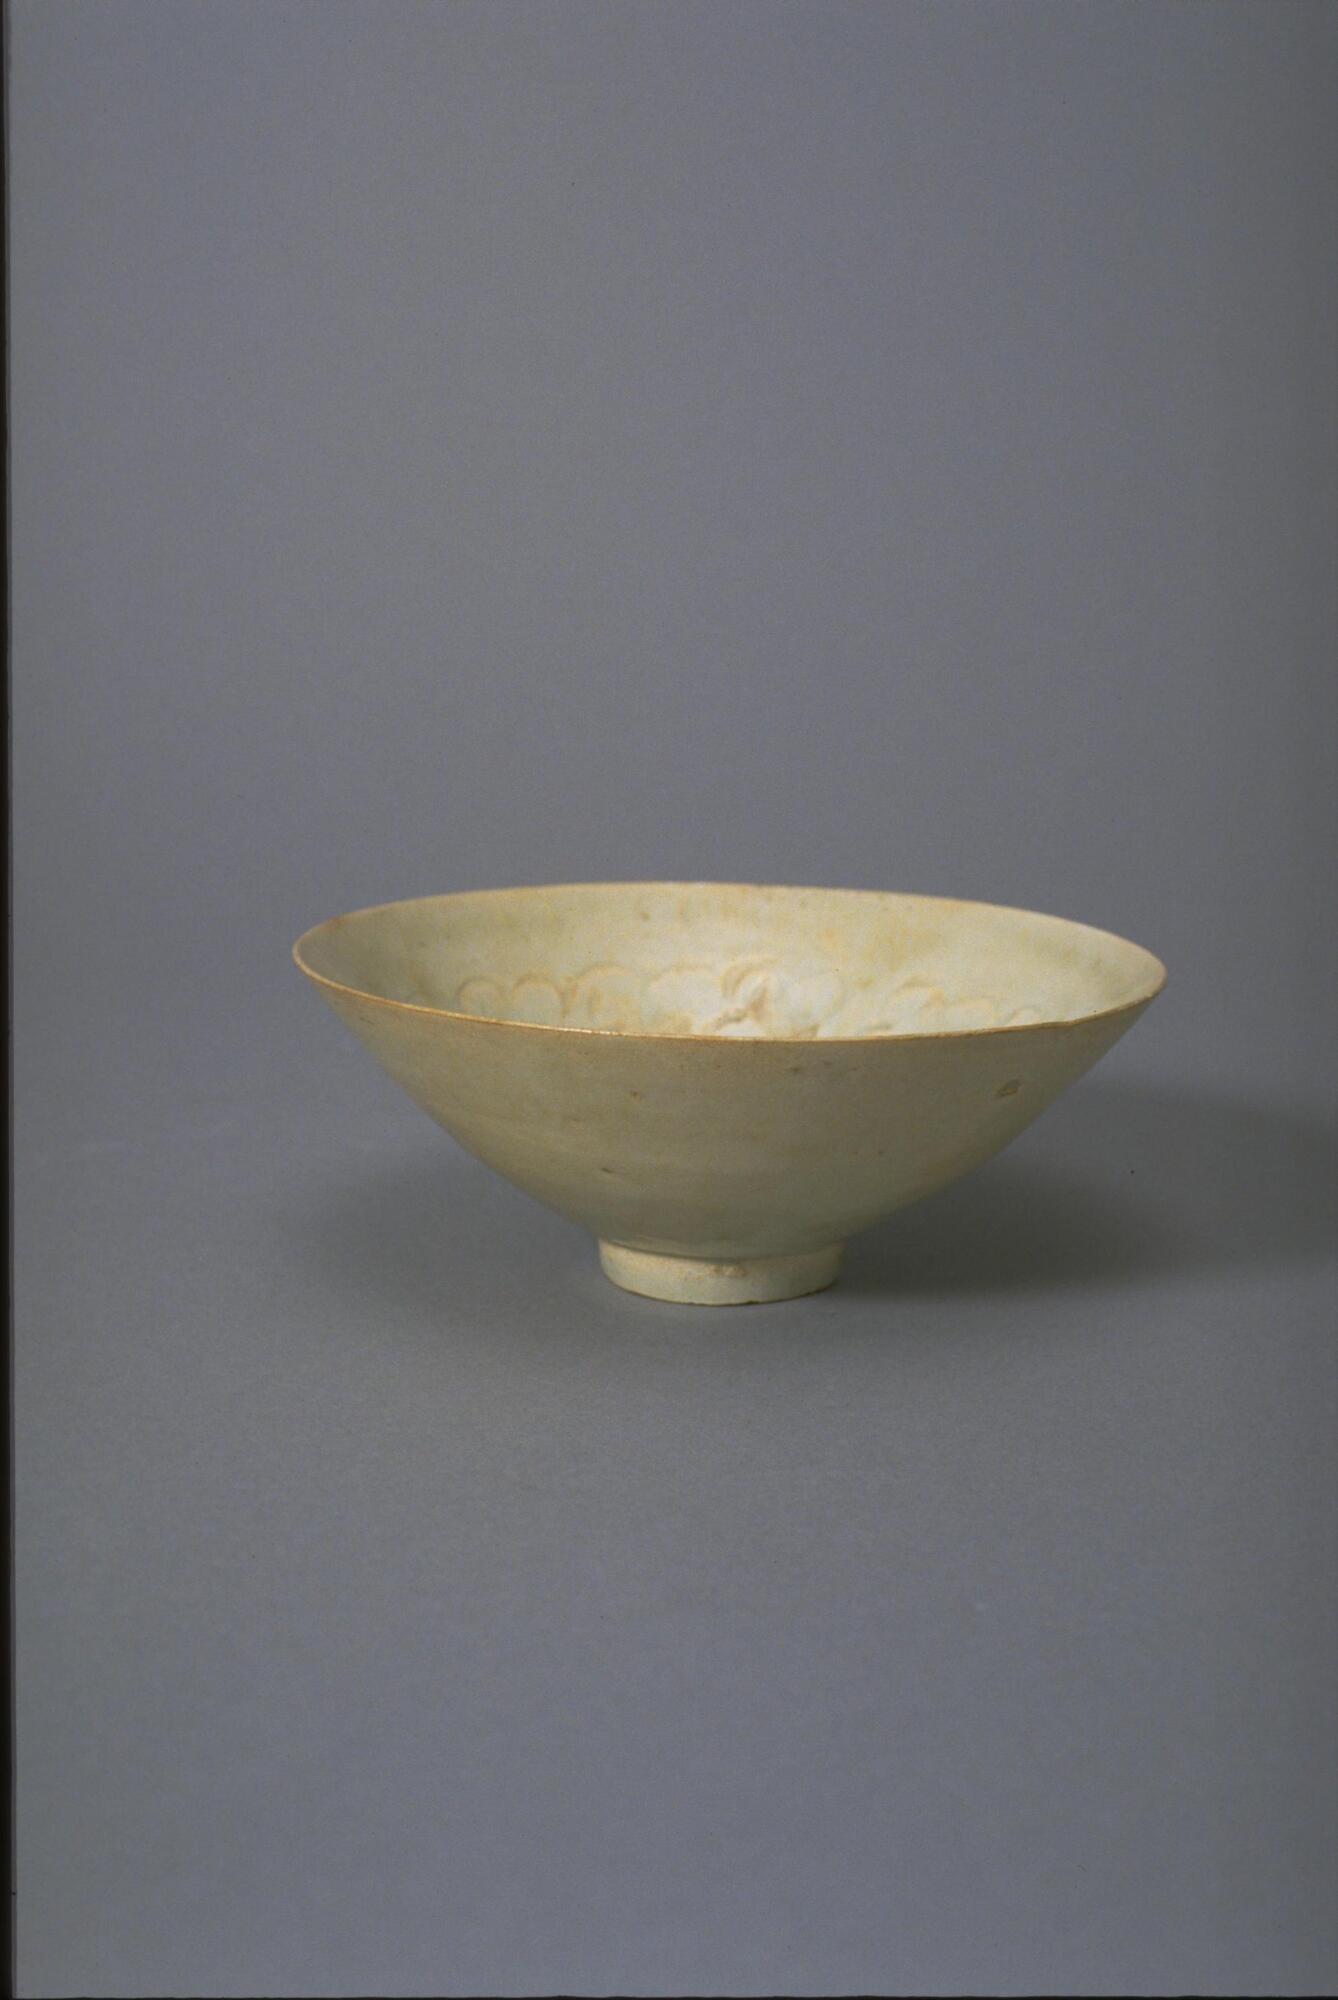 This thin porcelain conical bowl with direct rim on a footring has an interior with incised and combed cloud decoration. It is covered in a white glaze with bluish tinge and has an unglazed rim.